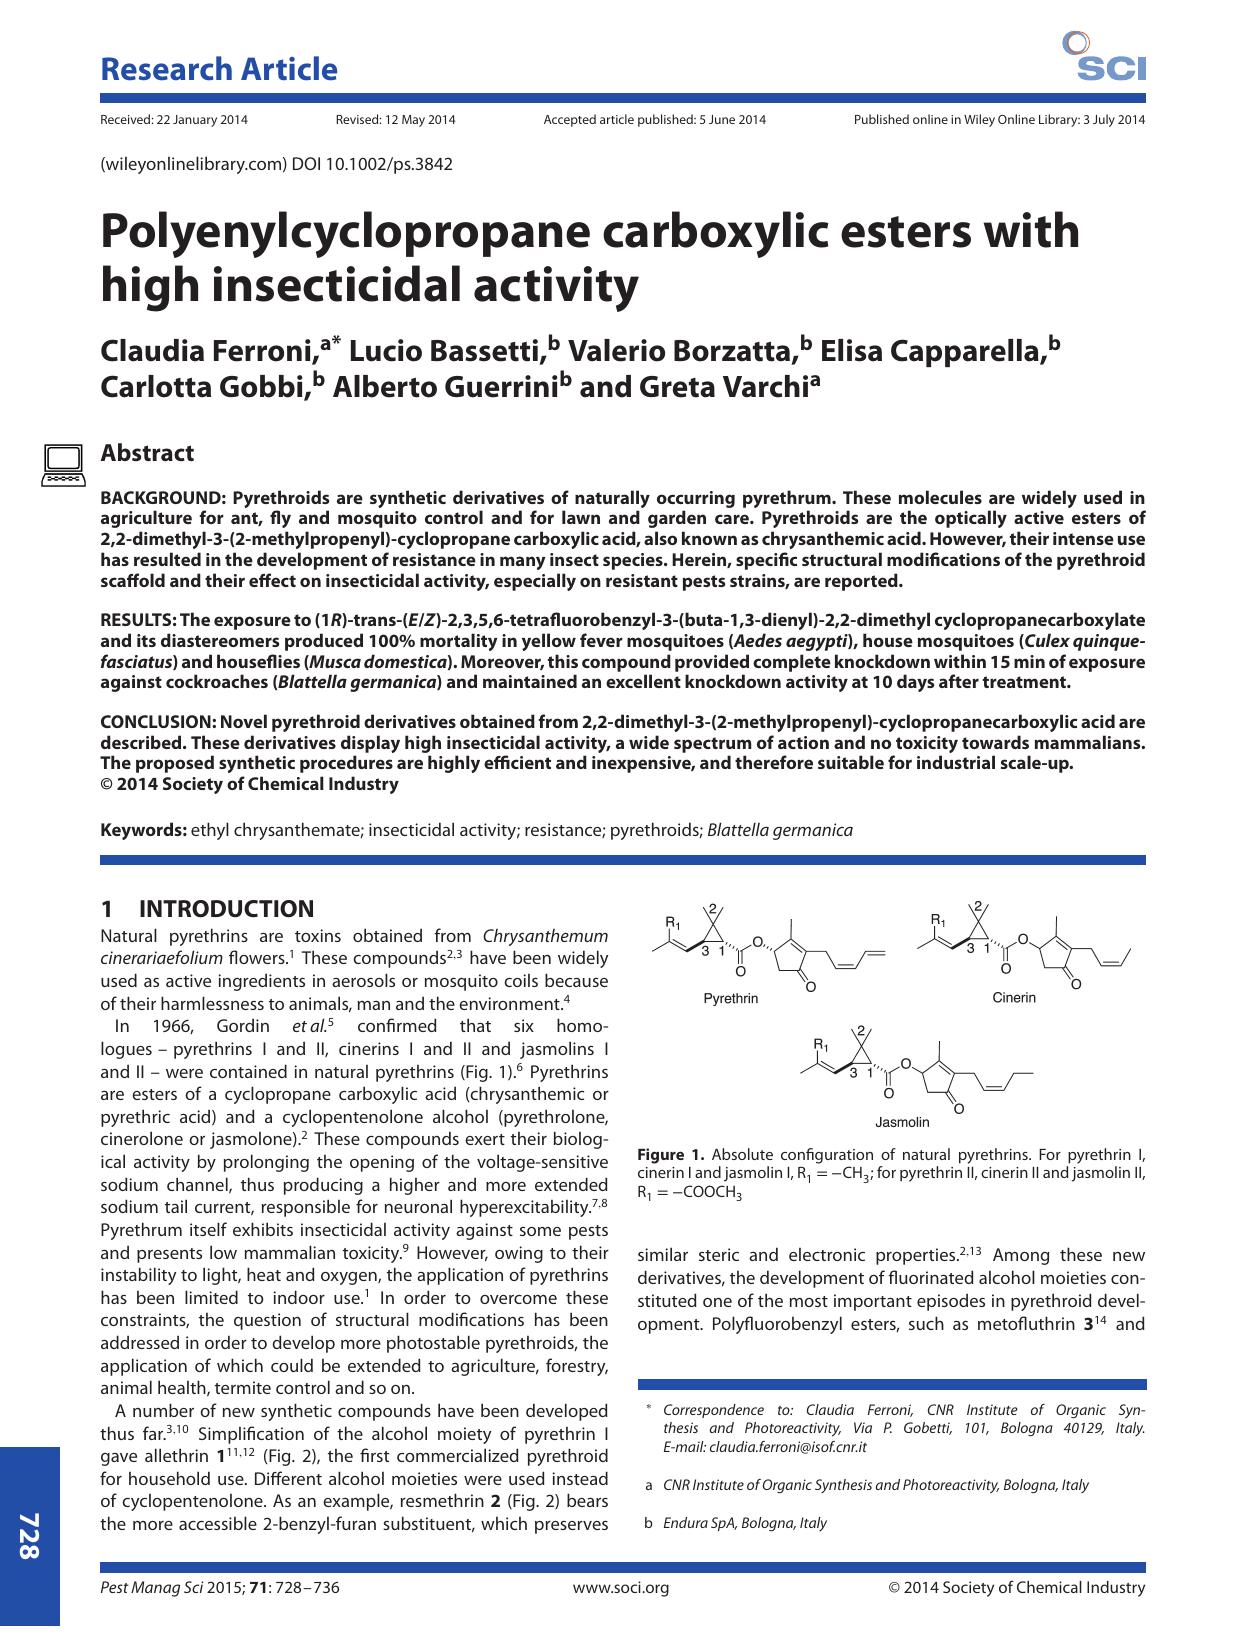 Polyenylcyclopropane carboxylic esters with high insecticidal activity by Unknown